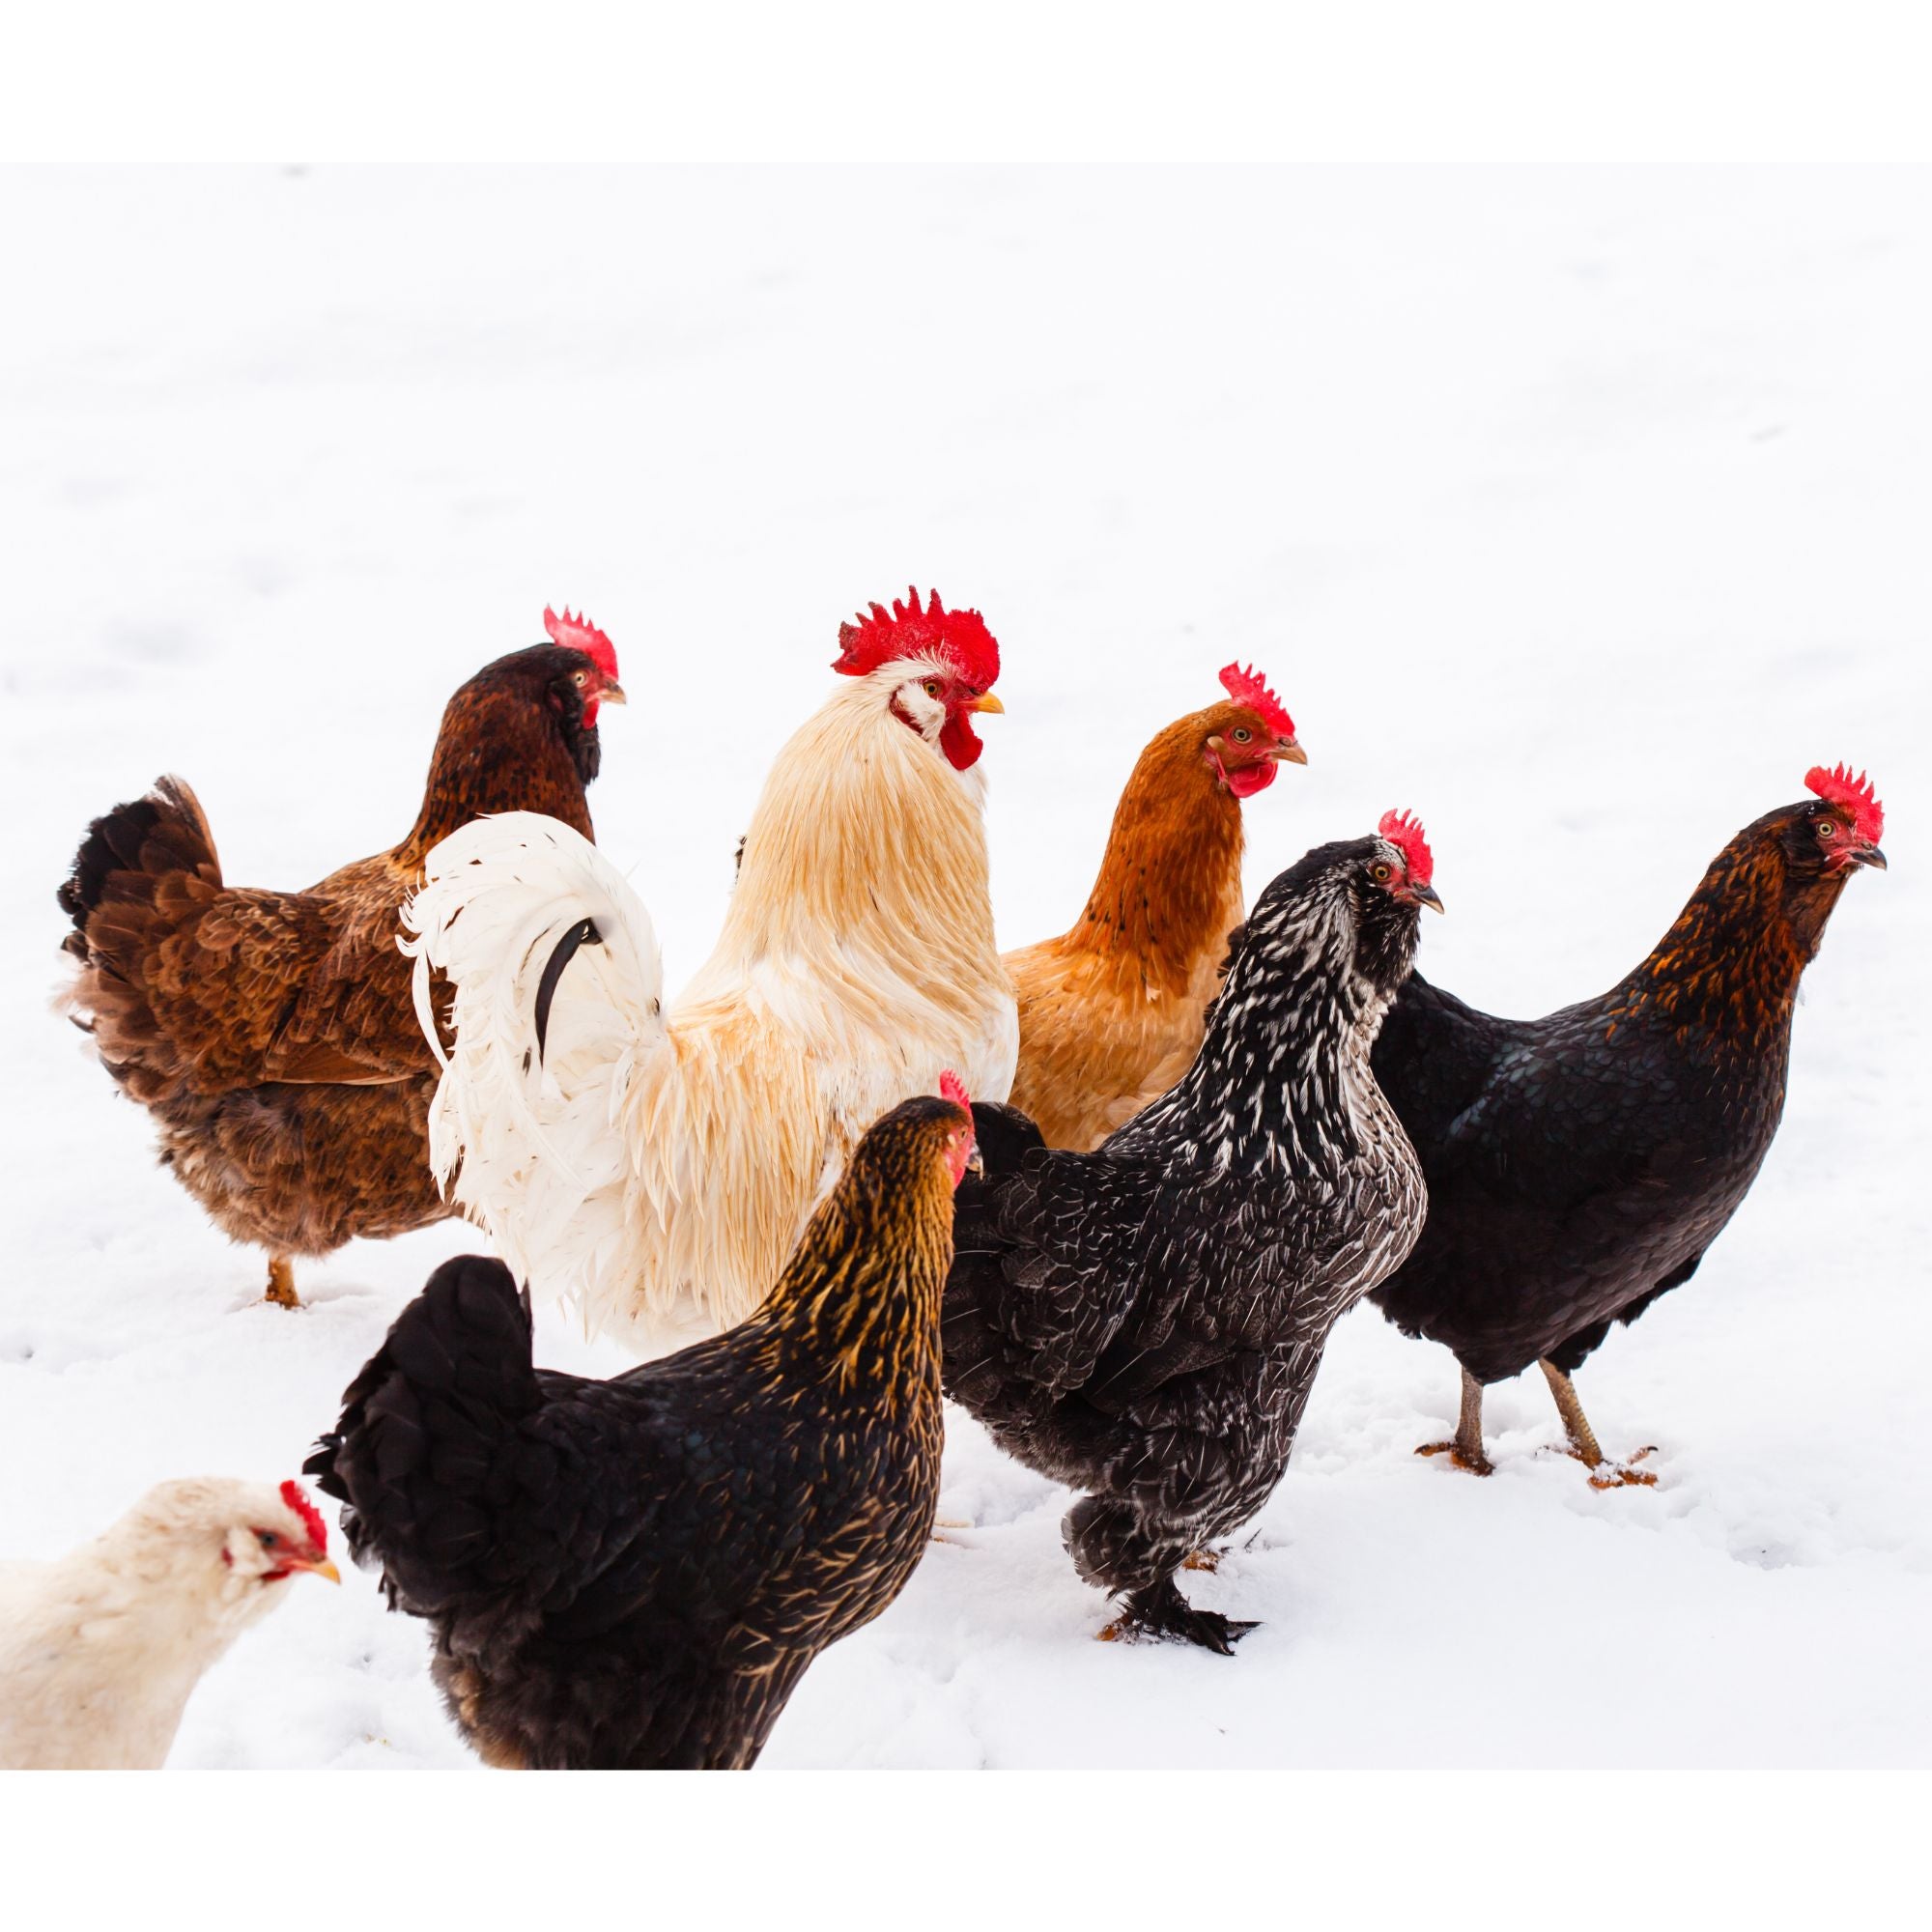 Yes, you can mix different chicken breeds in a flock. 